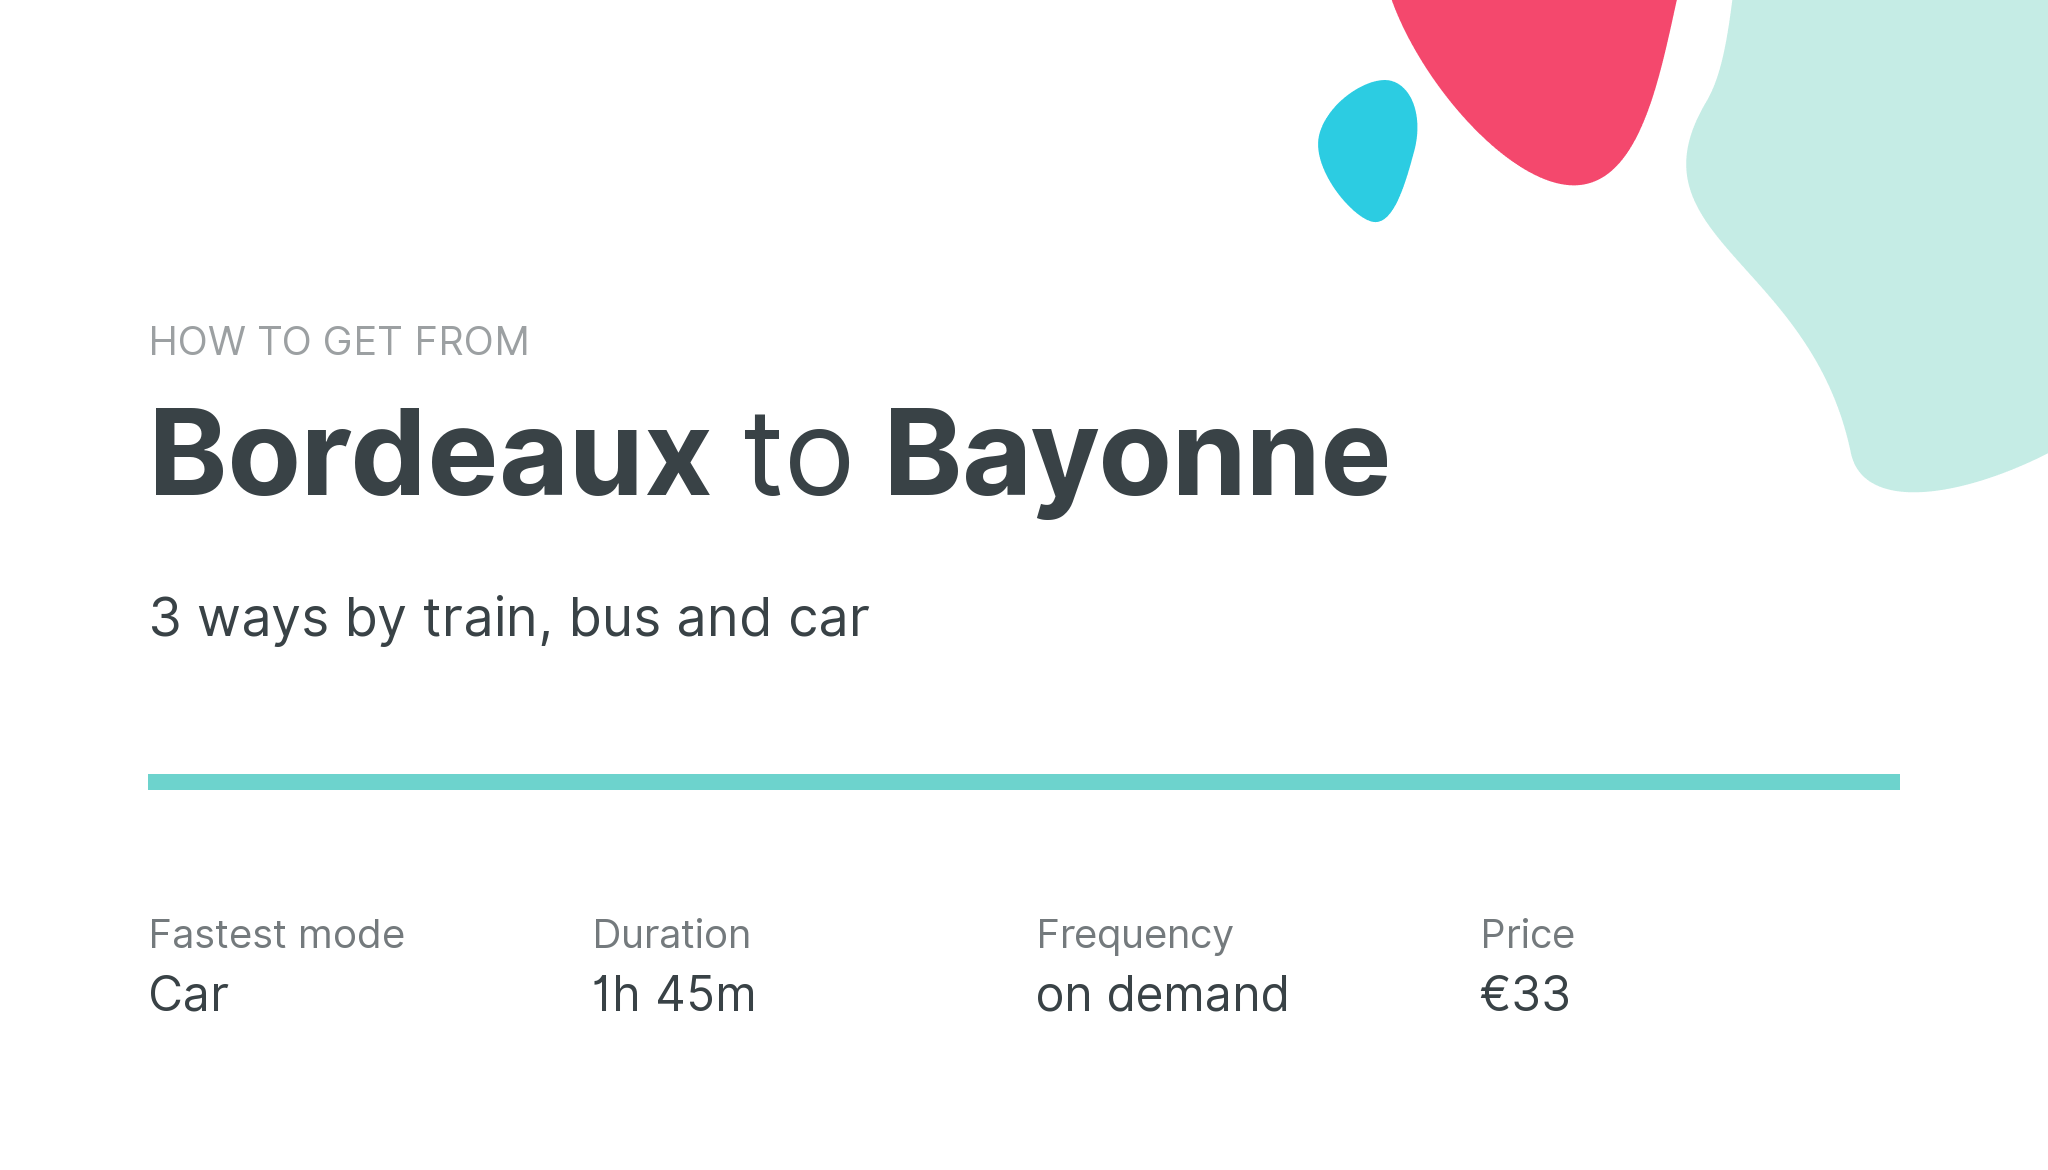 How do I get from Bordeaux to Bayonne